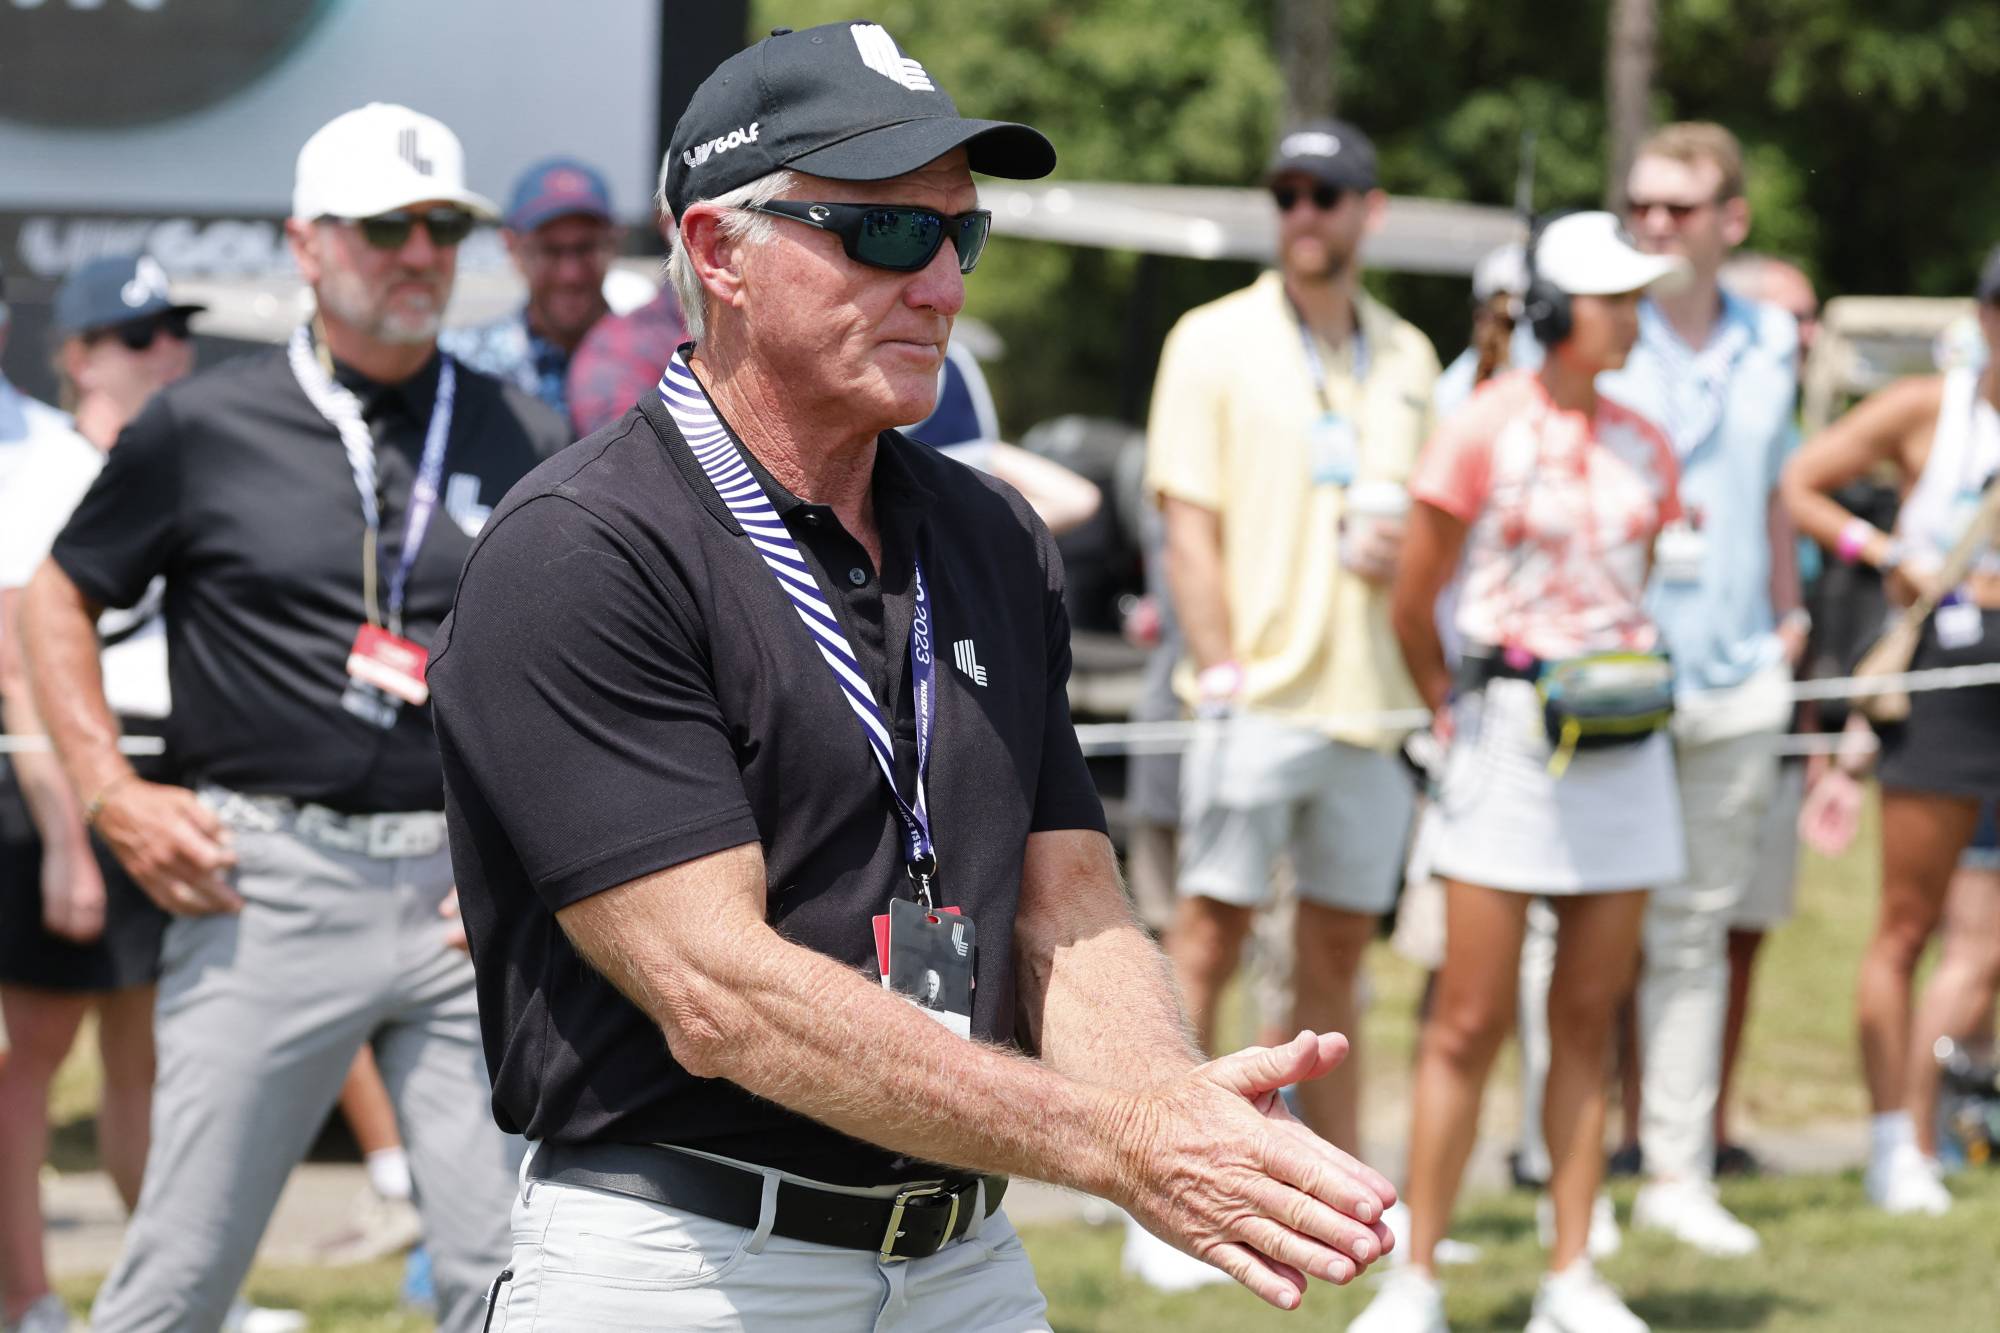 LIV Golf tour Commissioner Greg Norman walks onto the first tee during the final round of a LIV Golf event at Orange County National in Orlando, Florida, on April 2. | USA TODAY/ VIA REUTERS